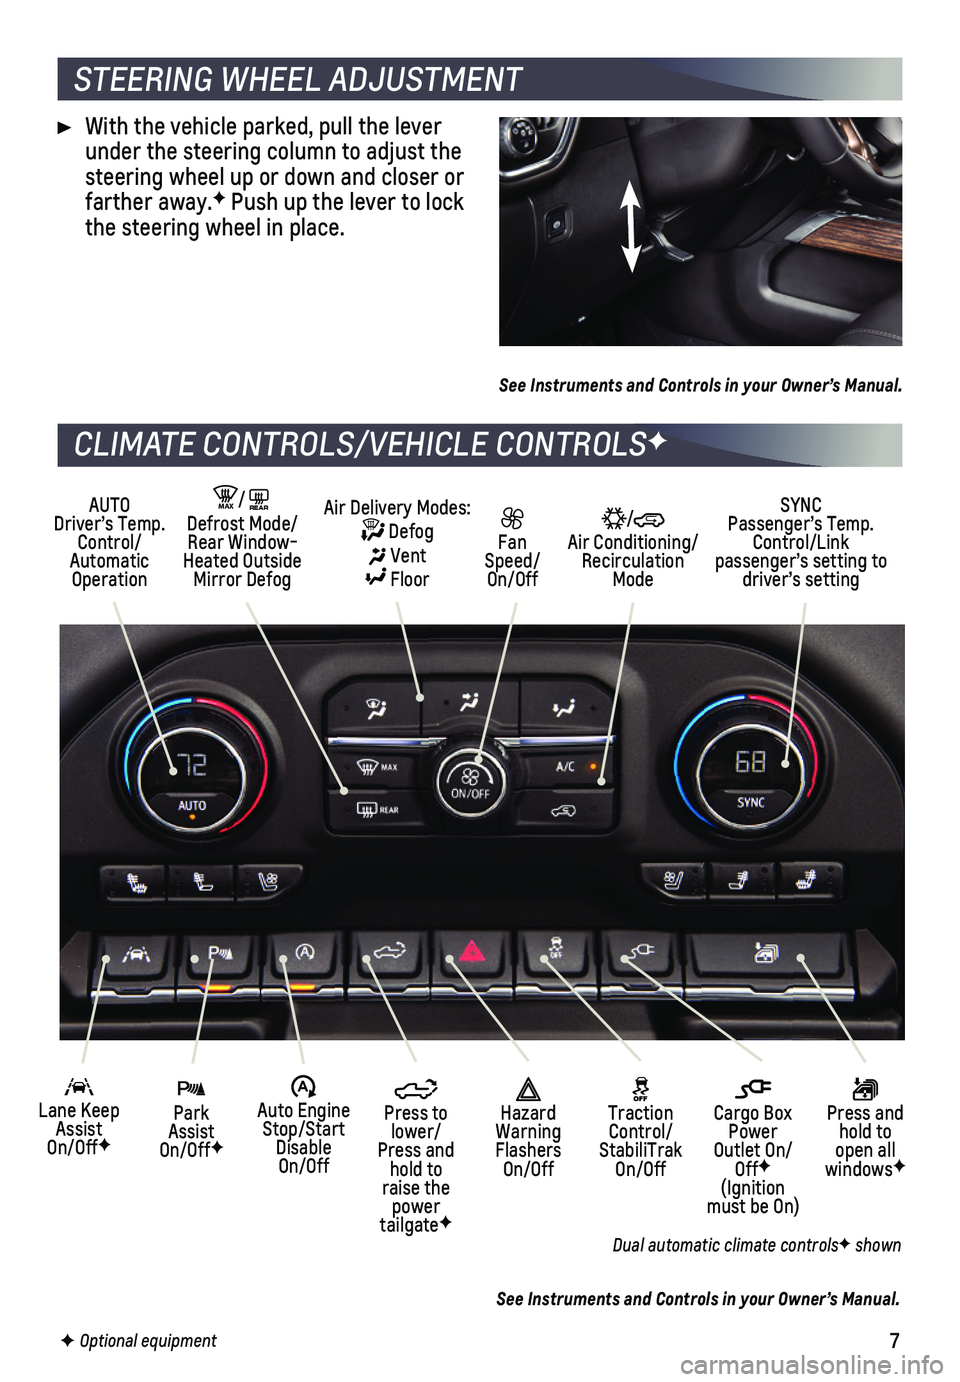 CHEVROLET SILVERADO 2019  Get To Know Guide 7F Optional equipment  
STEERING WHEEL ADJUSTMENT
CLIMATE CONTROLS/VEHICLE CONTROLSF
 With the vehicle parked, pull the lever under the steering column to adjust the steering wheel up or down and clos